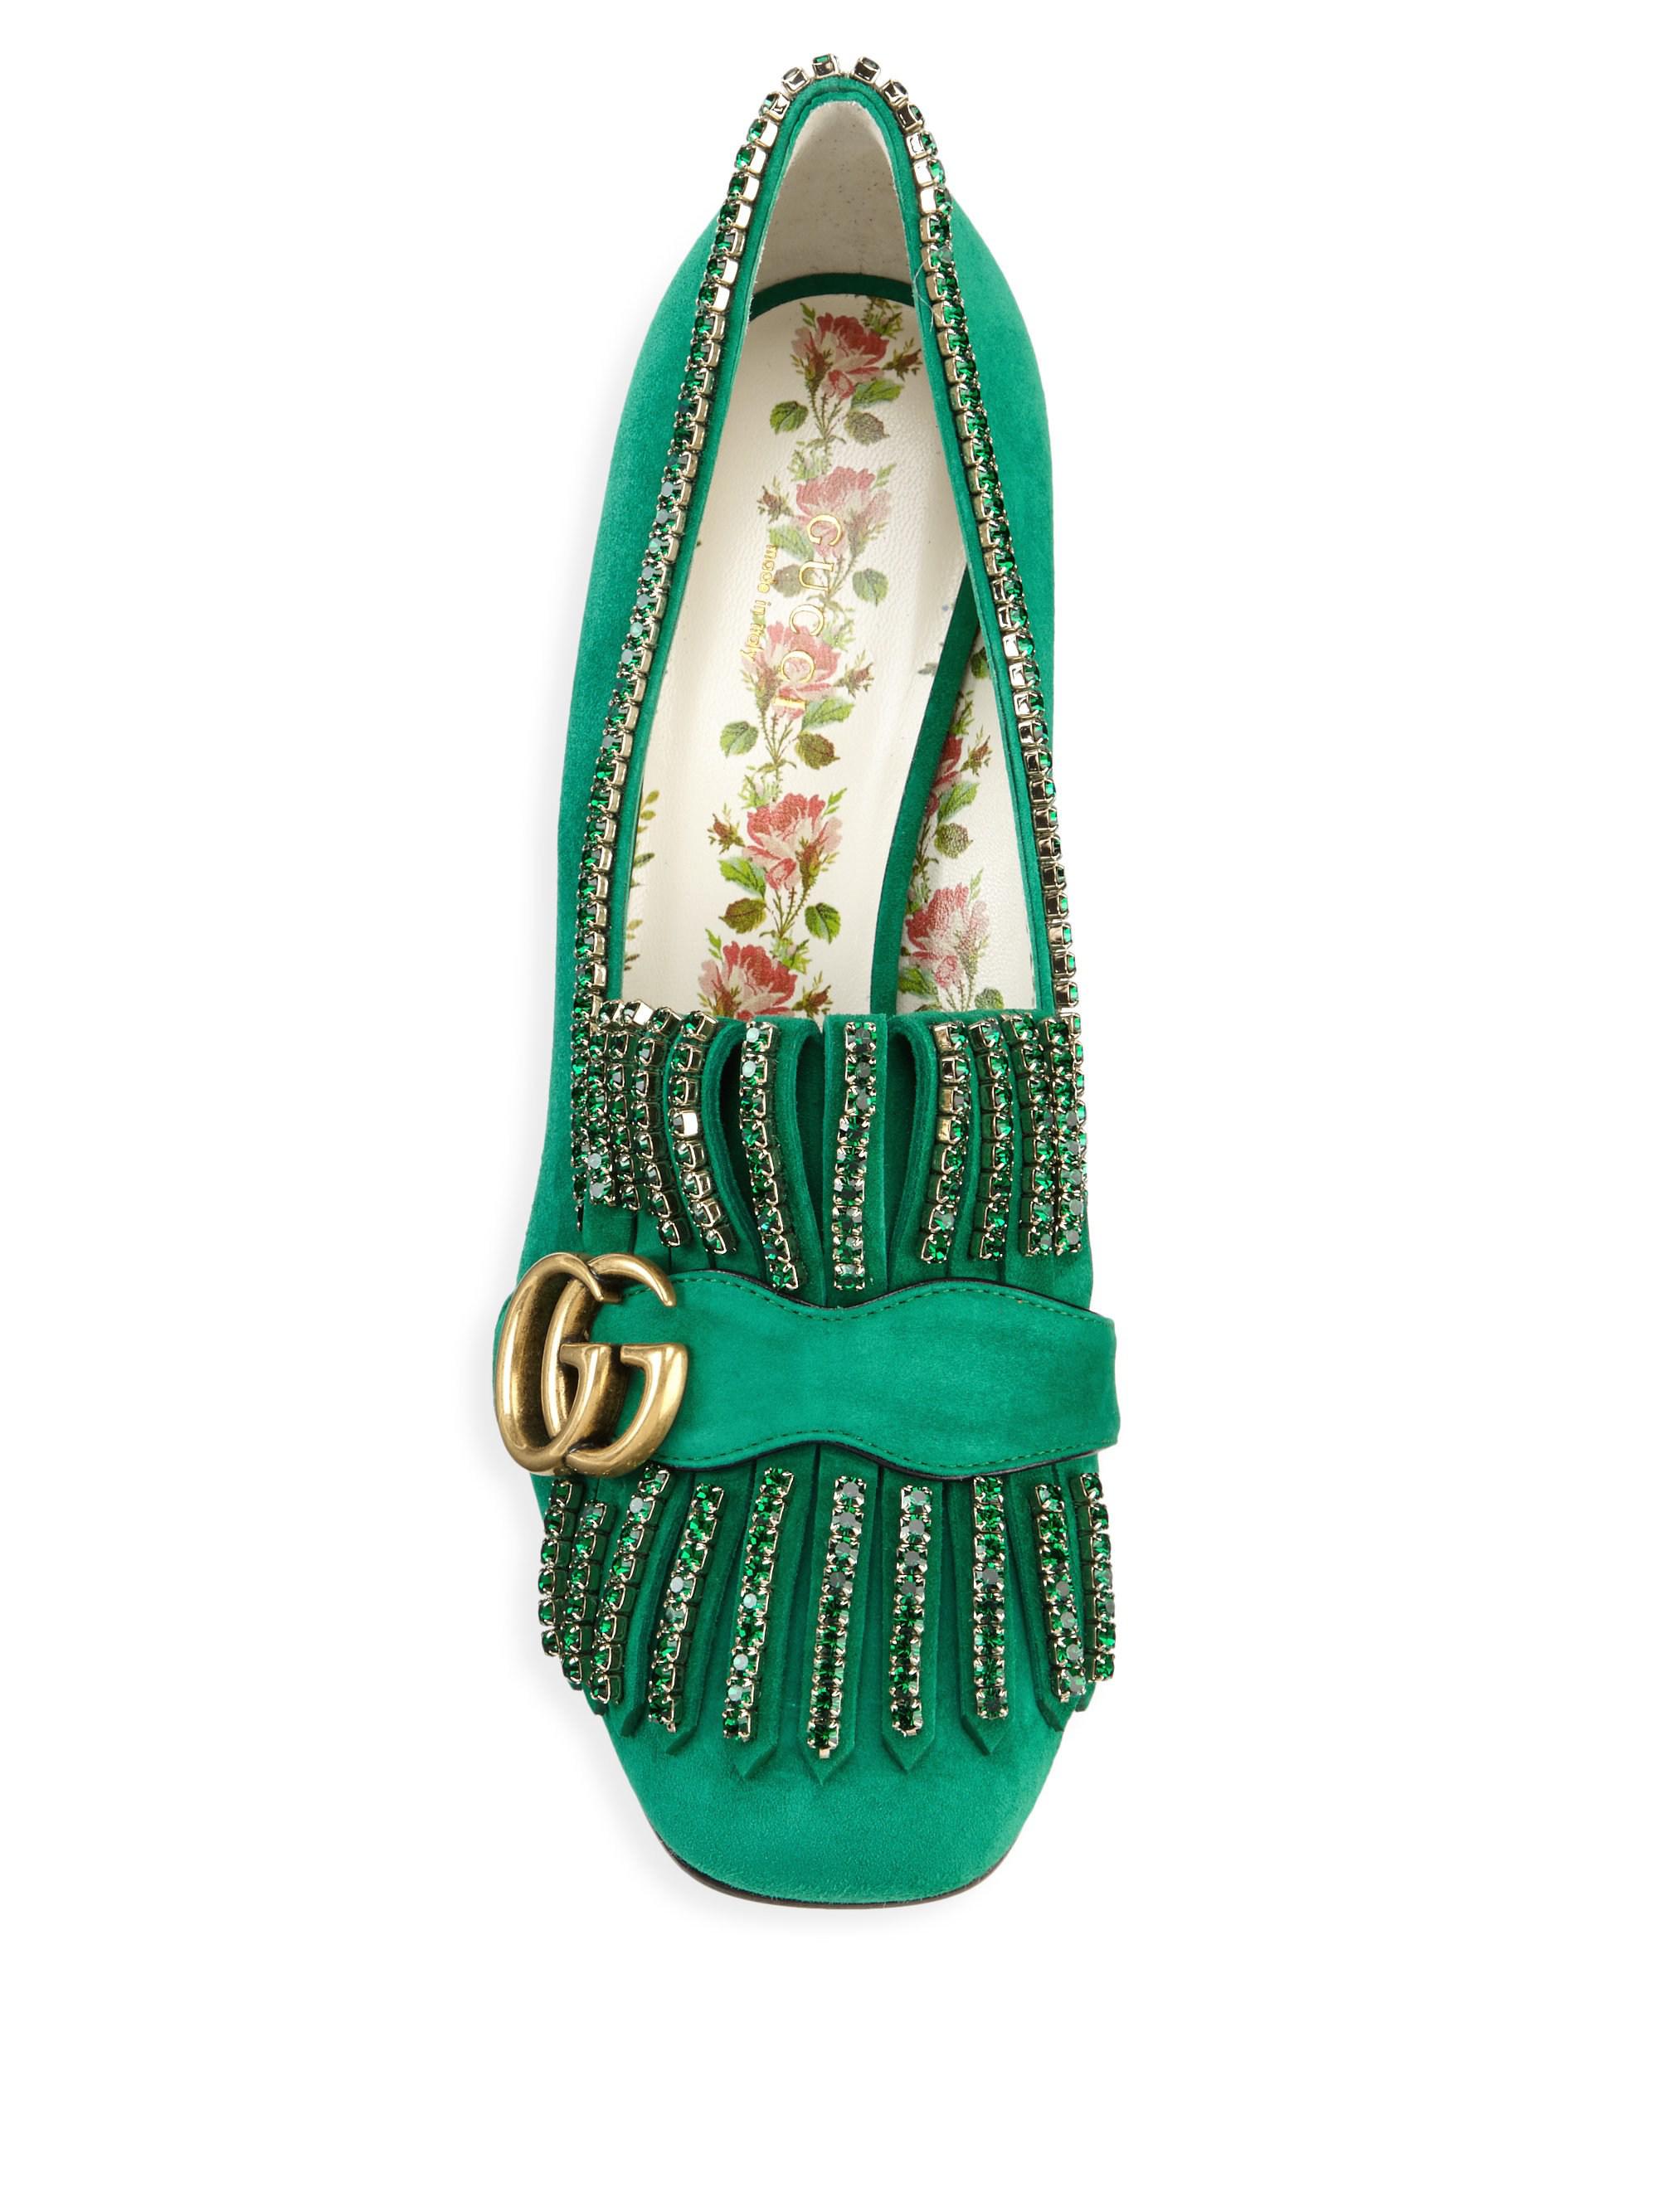 Gucci Marmont Mid-heel Pumps With Crystals in Emerald (Green) Lyst